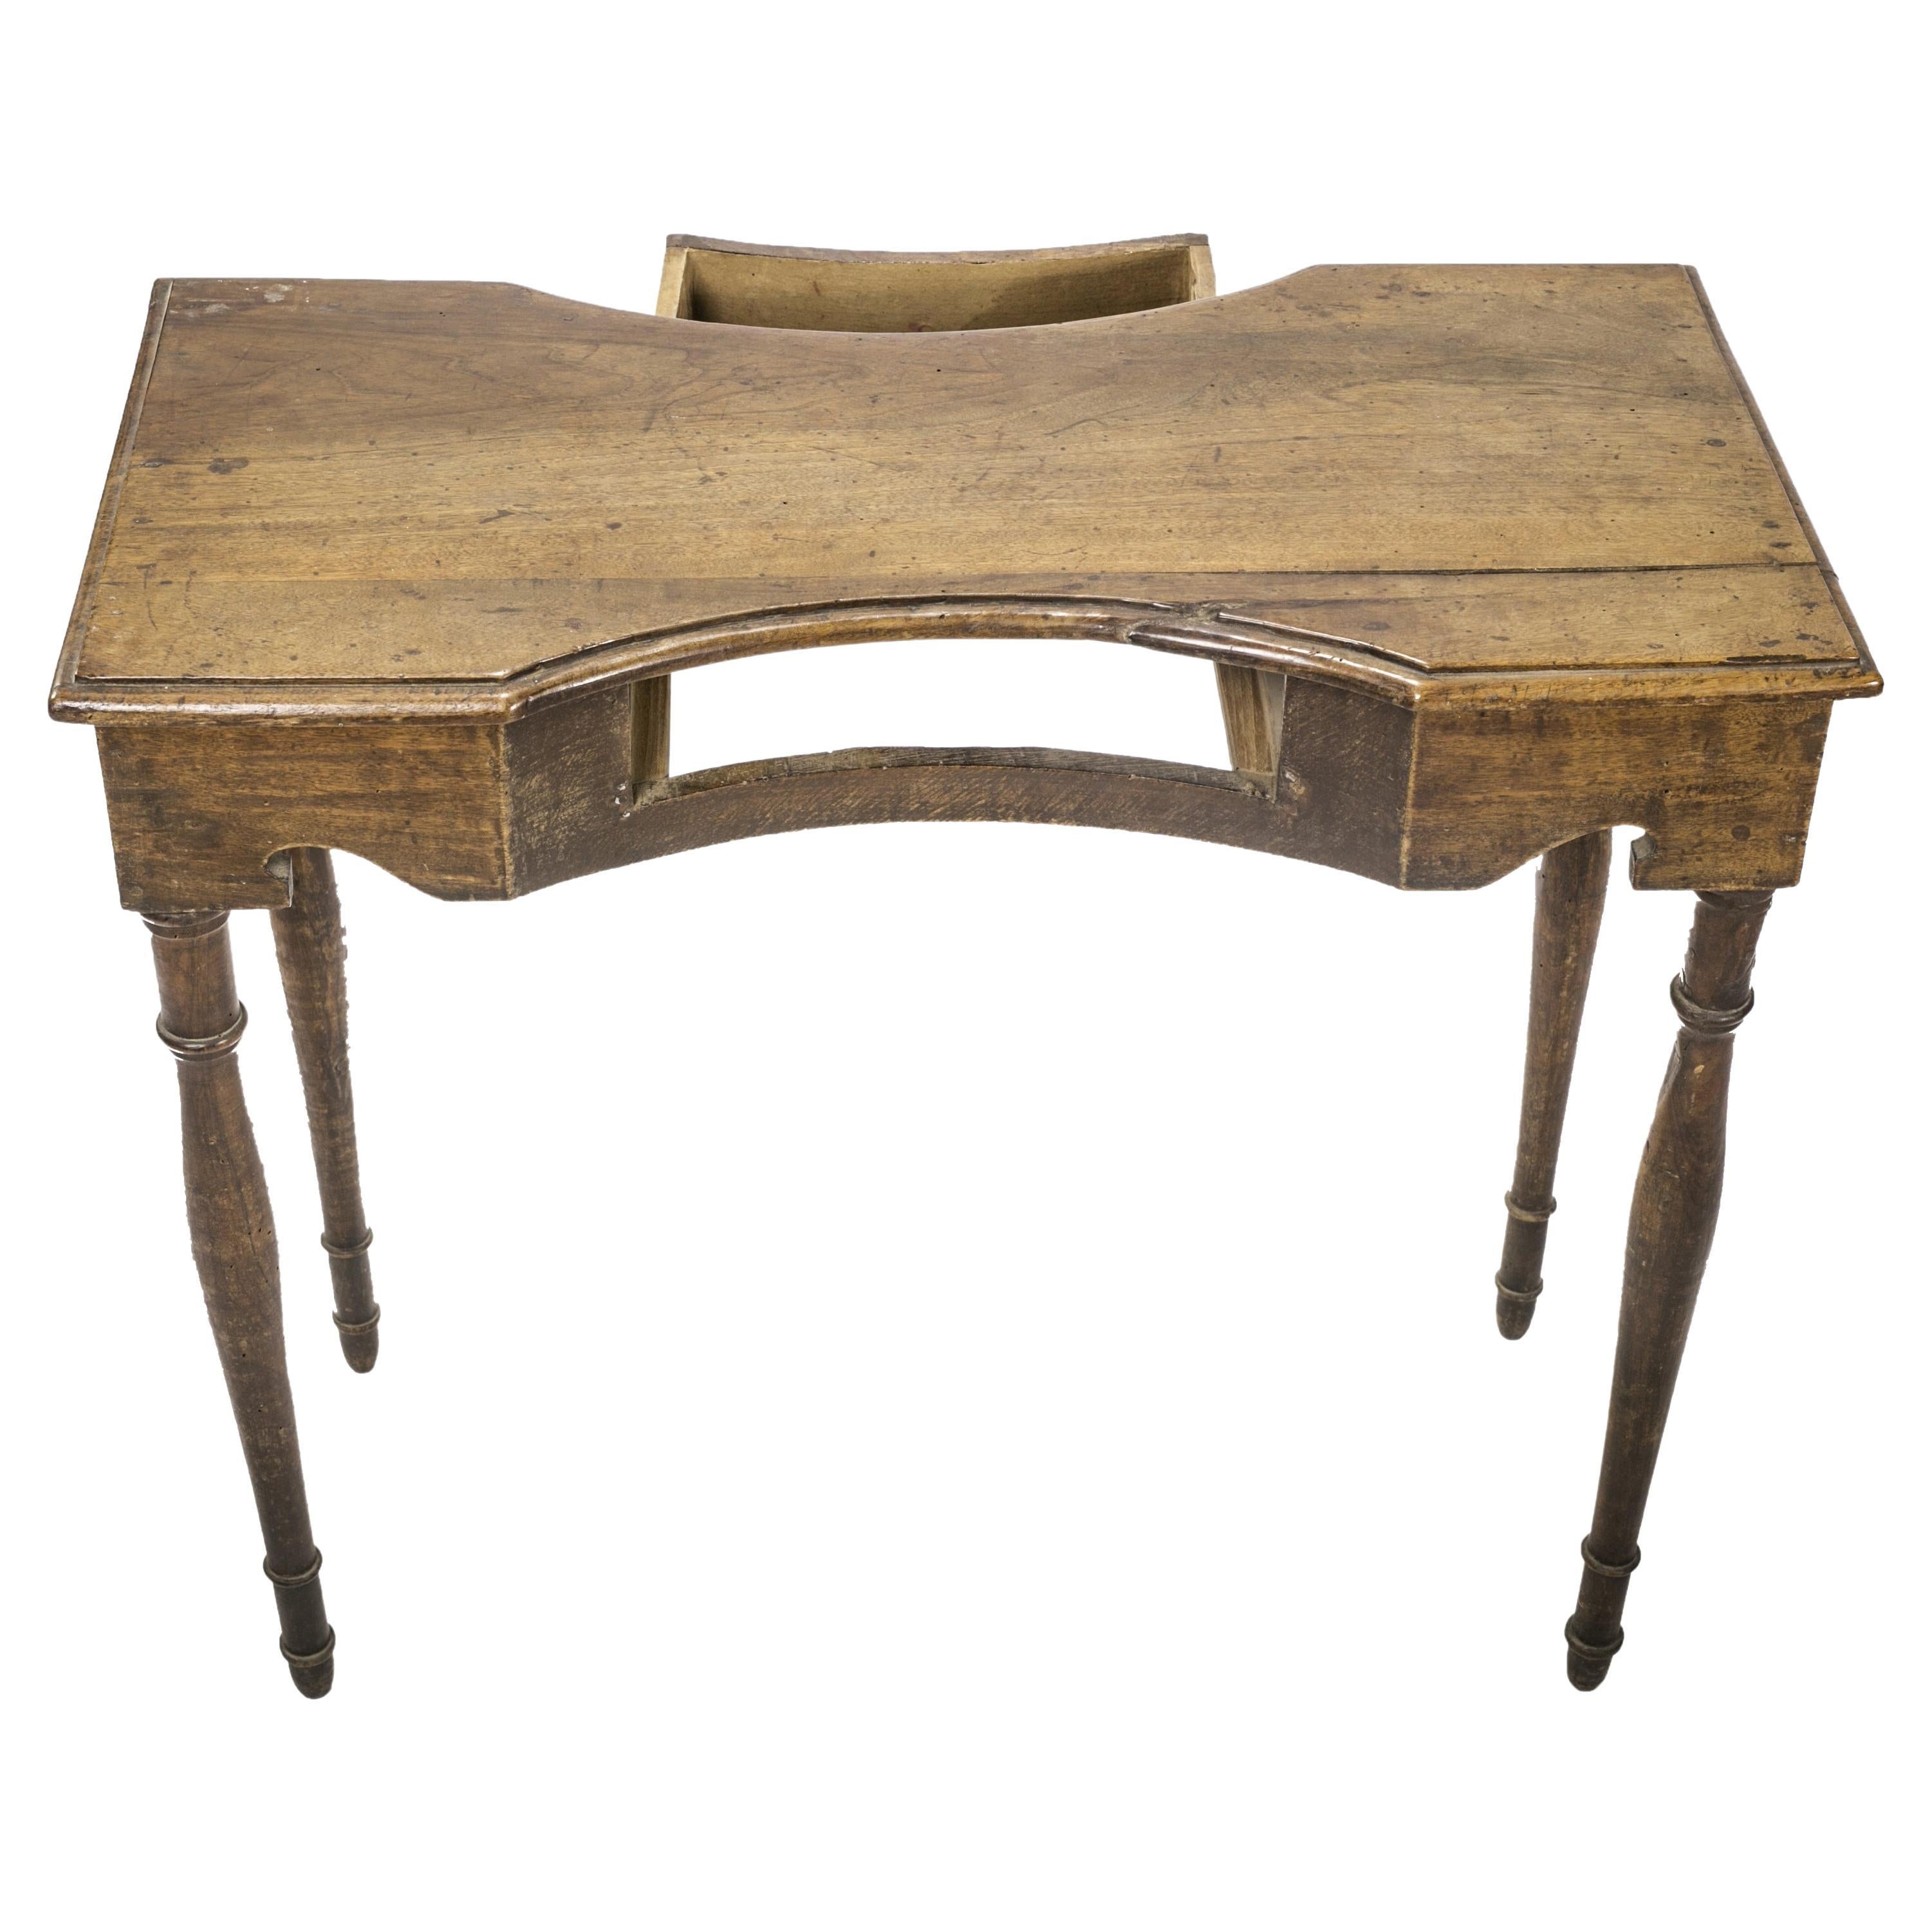 Engagement Table for Exchanging Messages Between Lovers in the Early 1800s